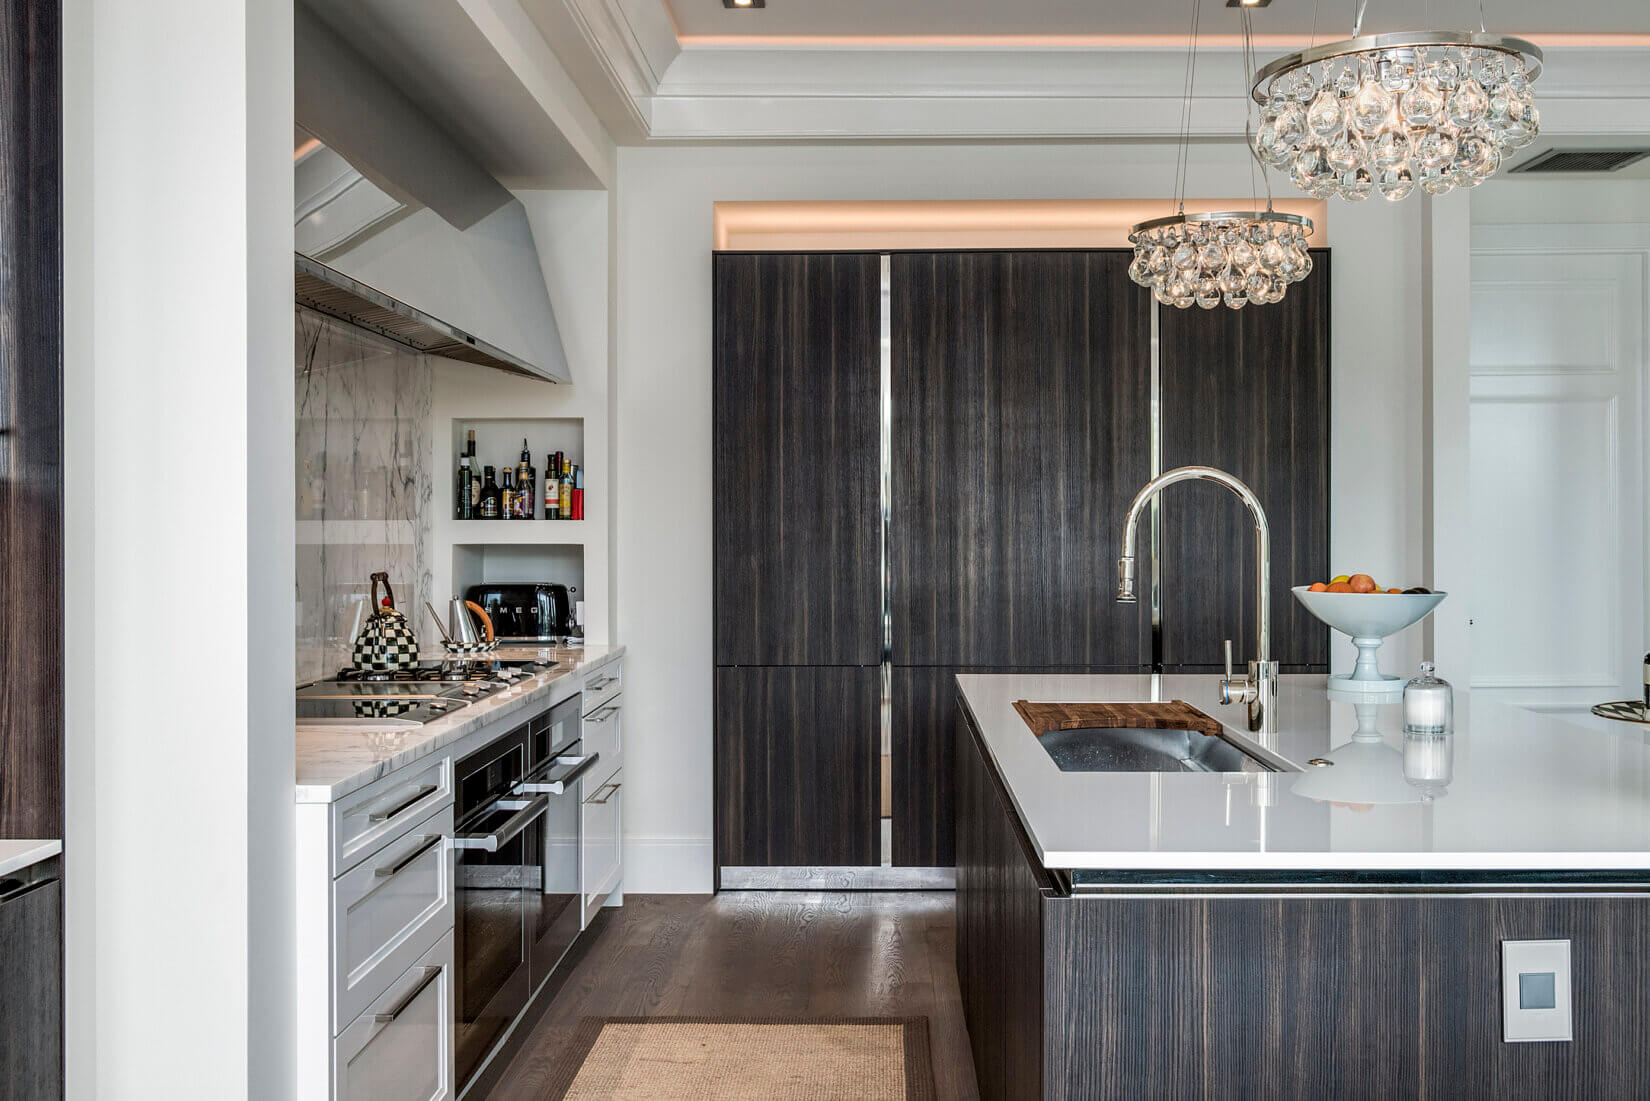 Luxury kitchen with dark-wood cabinetry and upscale appliances